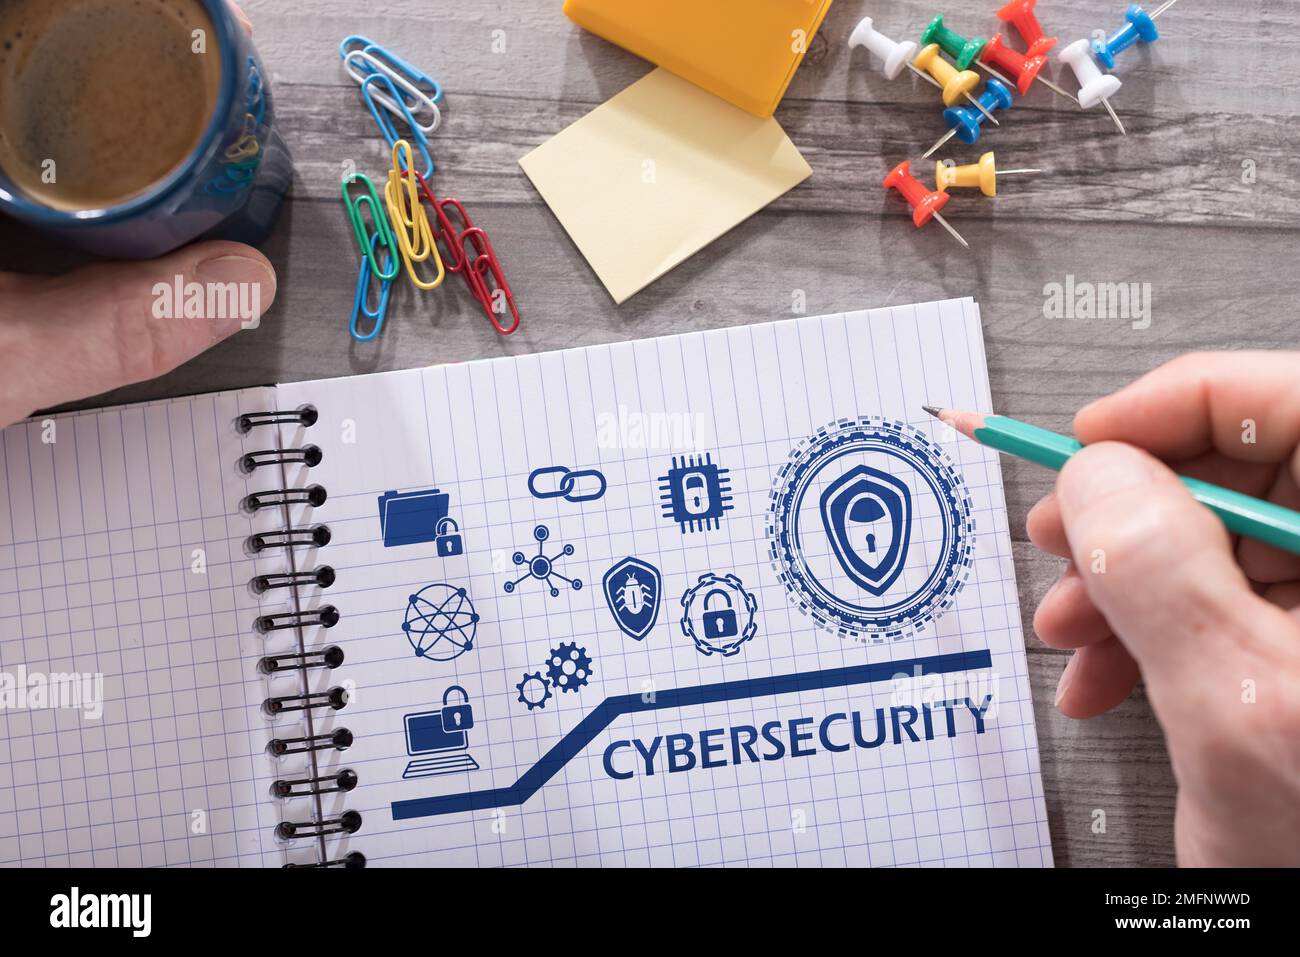 Cybersecurity concept drawn on a notepad placed on a desk Stock Photo